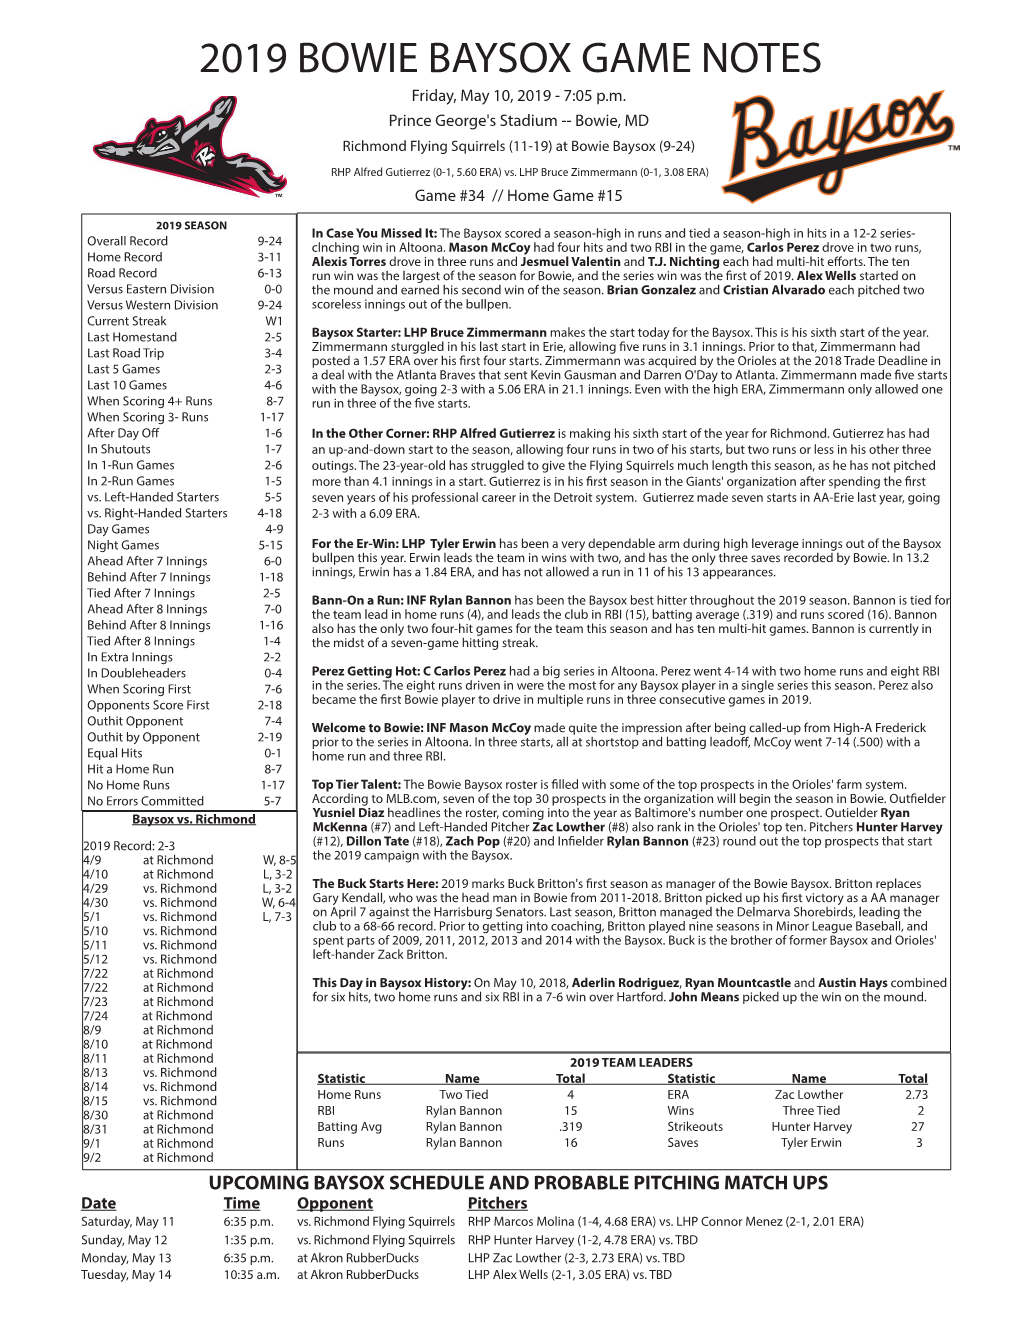 2019 BOWIE BAYSOX GAME NOTES Friday, May 10, 2019 - 7:05 P.M